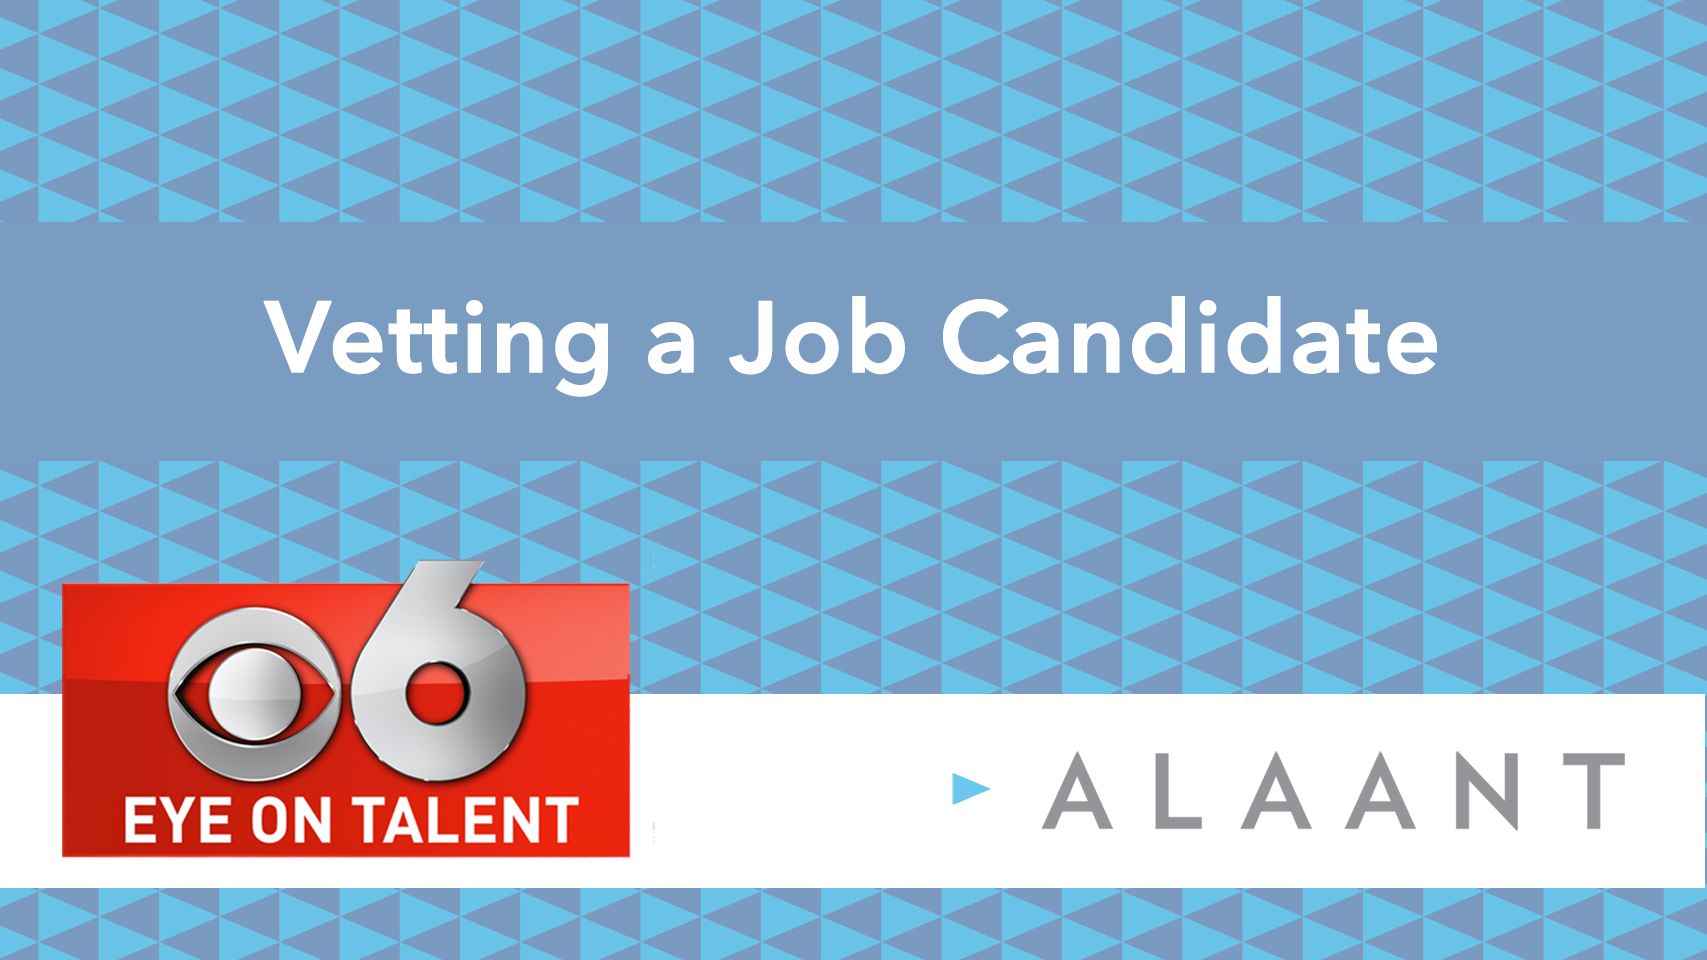 Alaant Eye on Talent: Vetting a Job Candidate